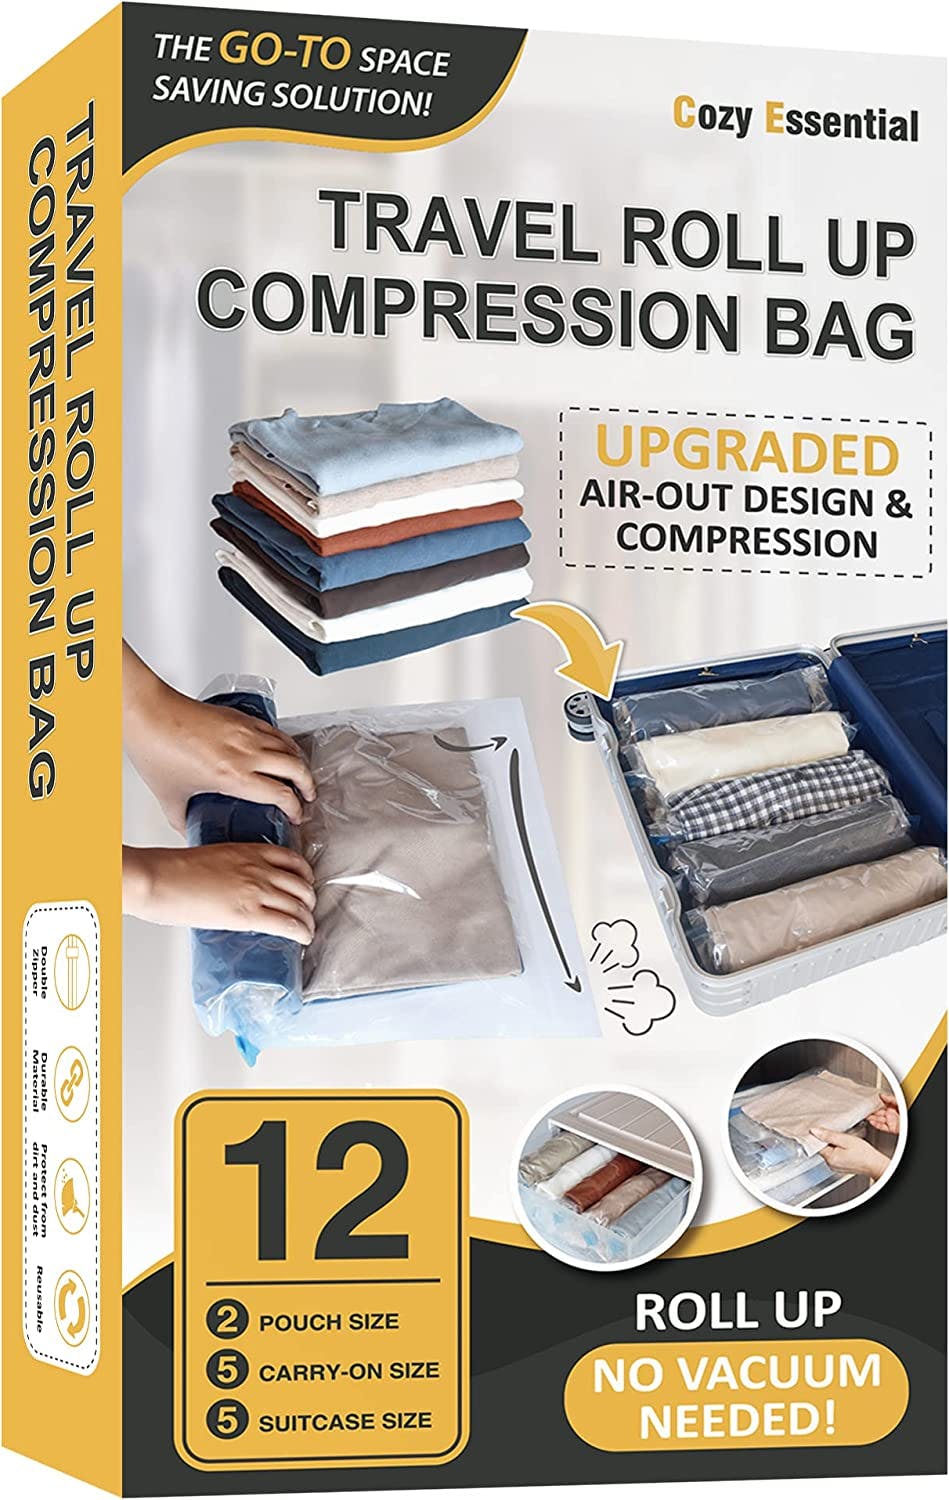 Roll up compression bags